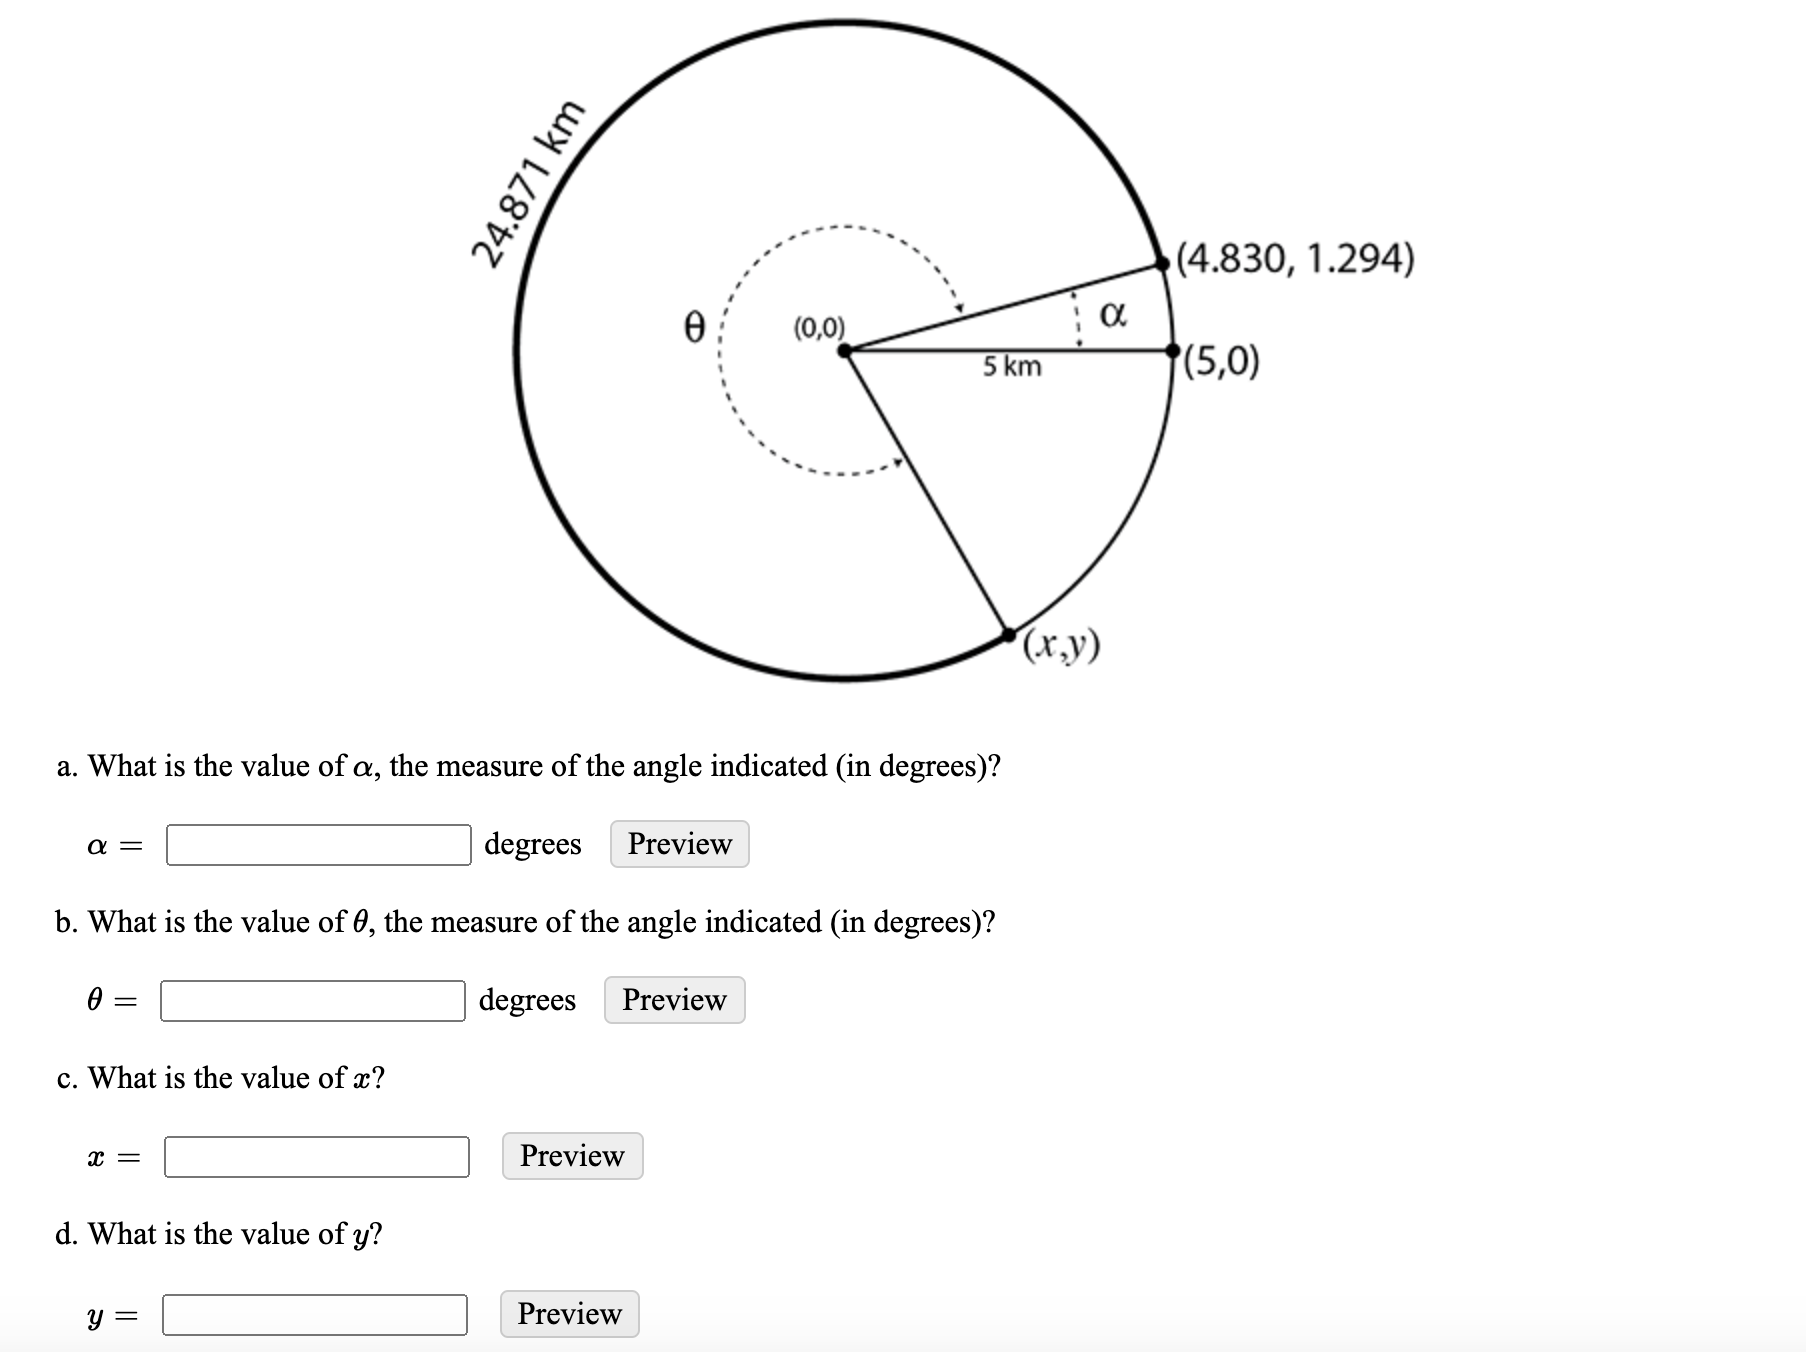 ### Understanding Angles and Coordinates in a Circular Diagram

#### Diagram Description
The diagram provided is of a circle with a radius of 24.871 km. The center of the circle is at the origin (0,0). A line segment from the center of the circle (0,0) to a point on the circle creates an angle \( \theta \). 

Another line segment extends from (0,0) to the point (5,0) which is on the horizontal axis. A third line extends from (0,0) to the point (4.830, 1.294), creating the angle \( \alpha \) between the horizontal line (5,0) and the point (4.830, 1.294). Additionally, a line from the center to the unknown point (x,y) is indicated with a question on its coordinates.

#### Questions
Below the diagram, there are several questions related to the angles and coordinates:

a. What is the value of \( \alpha \), the measure of the angle indicated (in degrees)?
\[ \alpha = \ \text{_________ degrees} \]

b. What is the value of \( \theta \), the measure of the angle indicated (in degrees)?
\[ \theta = \ \text{_________ degrees} \]

c. What is the value of \( x \)?
\[ x = \ \text{_________} \]

d. What is the value of \( y \)?
\[ y = \ \text{_________} \]

### Explanation
- The radius of the circle is explicitly mentioned as 24.871 km, which will help in determining the coordinates \( (x,y) \).
- The provided coordinates (4.830, 1.294) and (5,0) are essential for calculating \( \alpha \).
- The angle \( \theta \) is dependent on the relationship between the radius and the coordinates provided.

To solve these problems, use the trigonometric relationships and the circle's equation \( x^2 + y^2 = r^2 \) where \( r \) is the radius.

**Note:** For exact numerical calculations, consider using appropriate trigonometric functions and equations.

### Tasks
1. Calculate angle \( \alpha \).
2. Calculate angle \( \theta \).
3. Determine the x-coordinate.
4. Determine the y-coordinate.

For accurate calculation, students will need to apply the concepts of